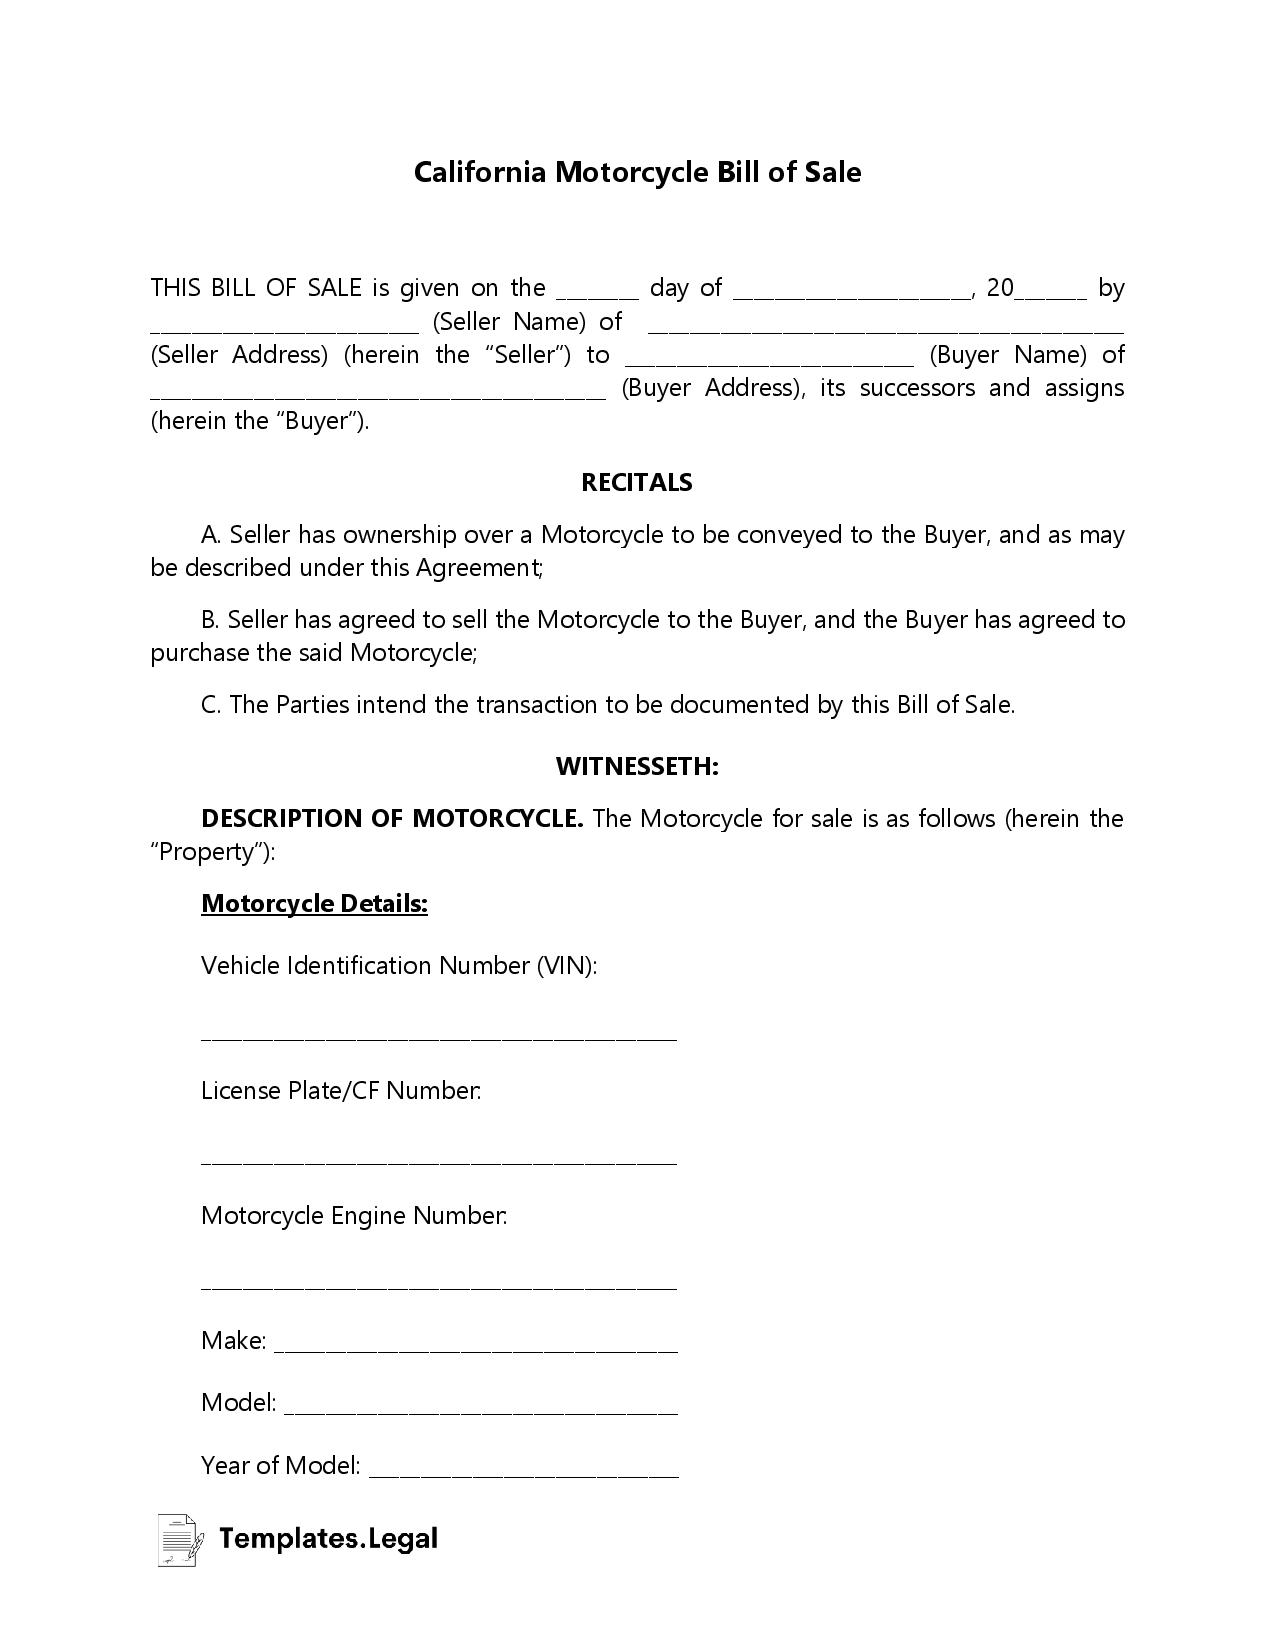 California Motorcycle Bill of Sale - Templates.Legal